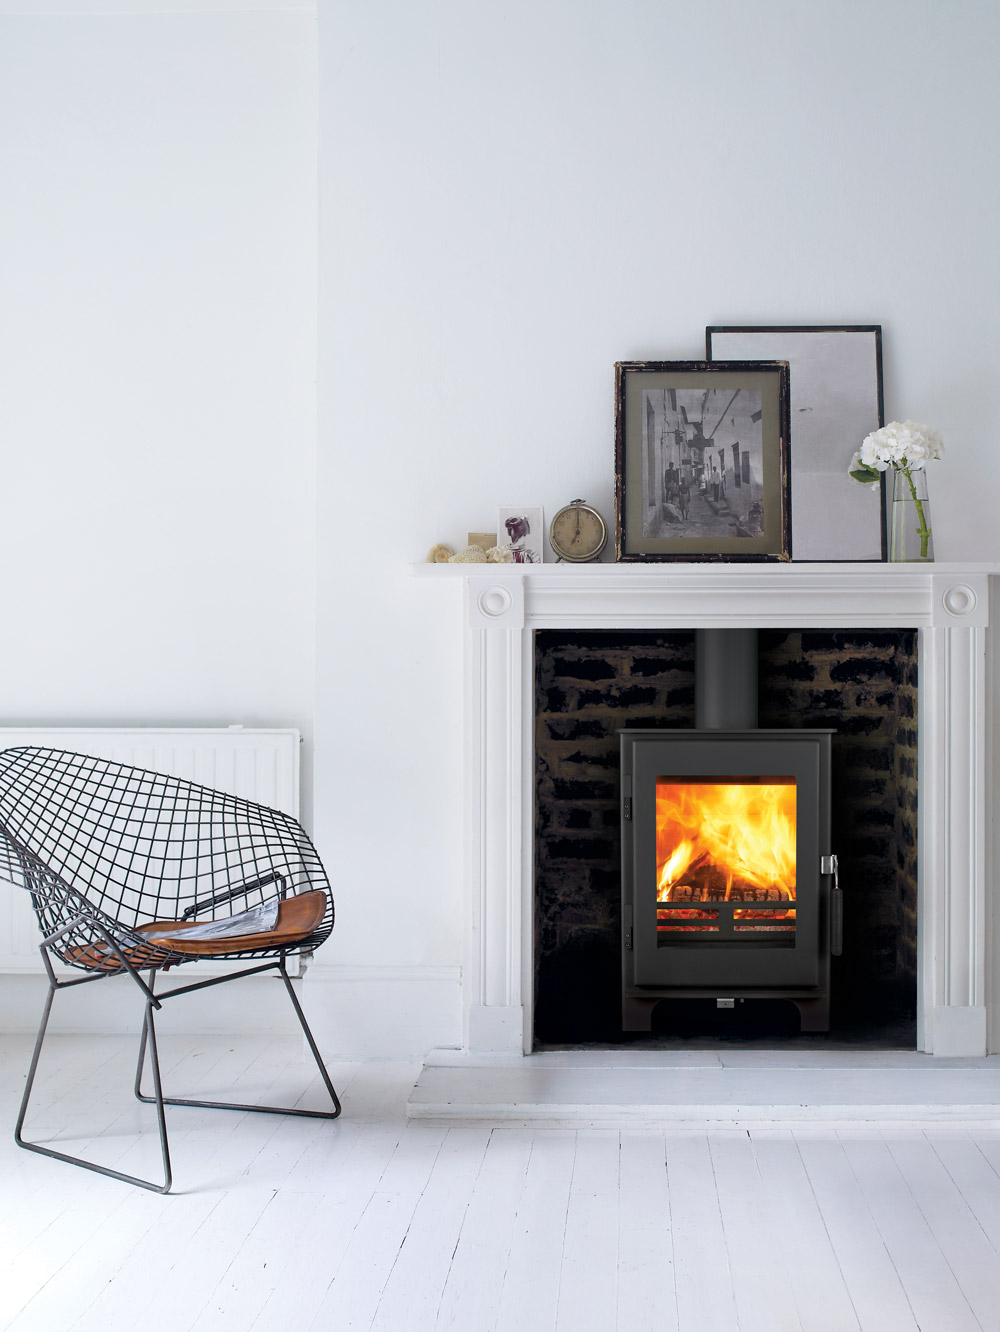 Jetmaster 18j multifuel stove - fire BY DESIGN, Dorset woodburners